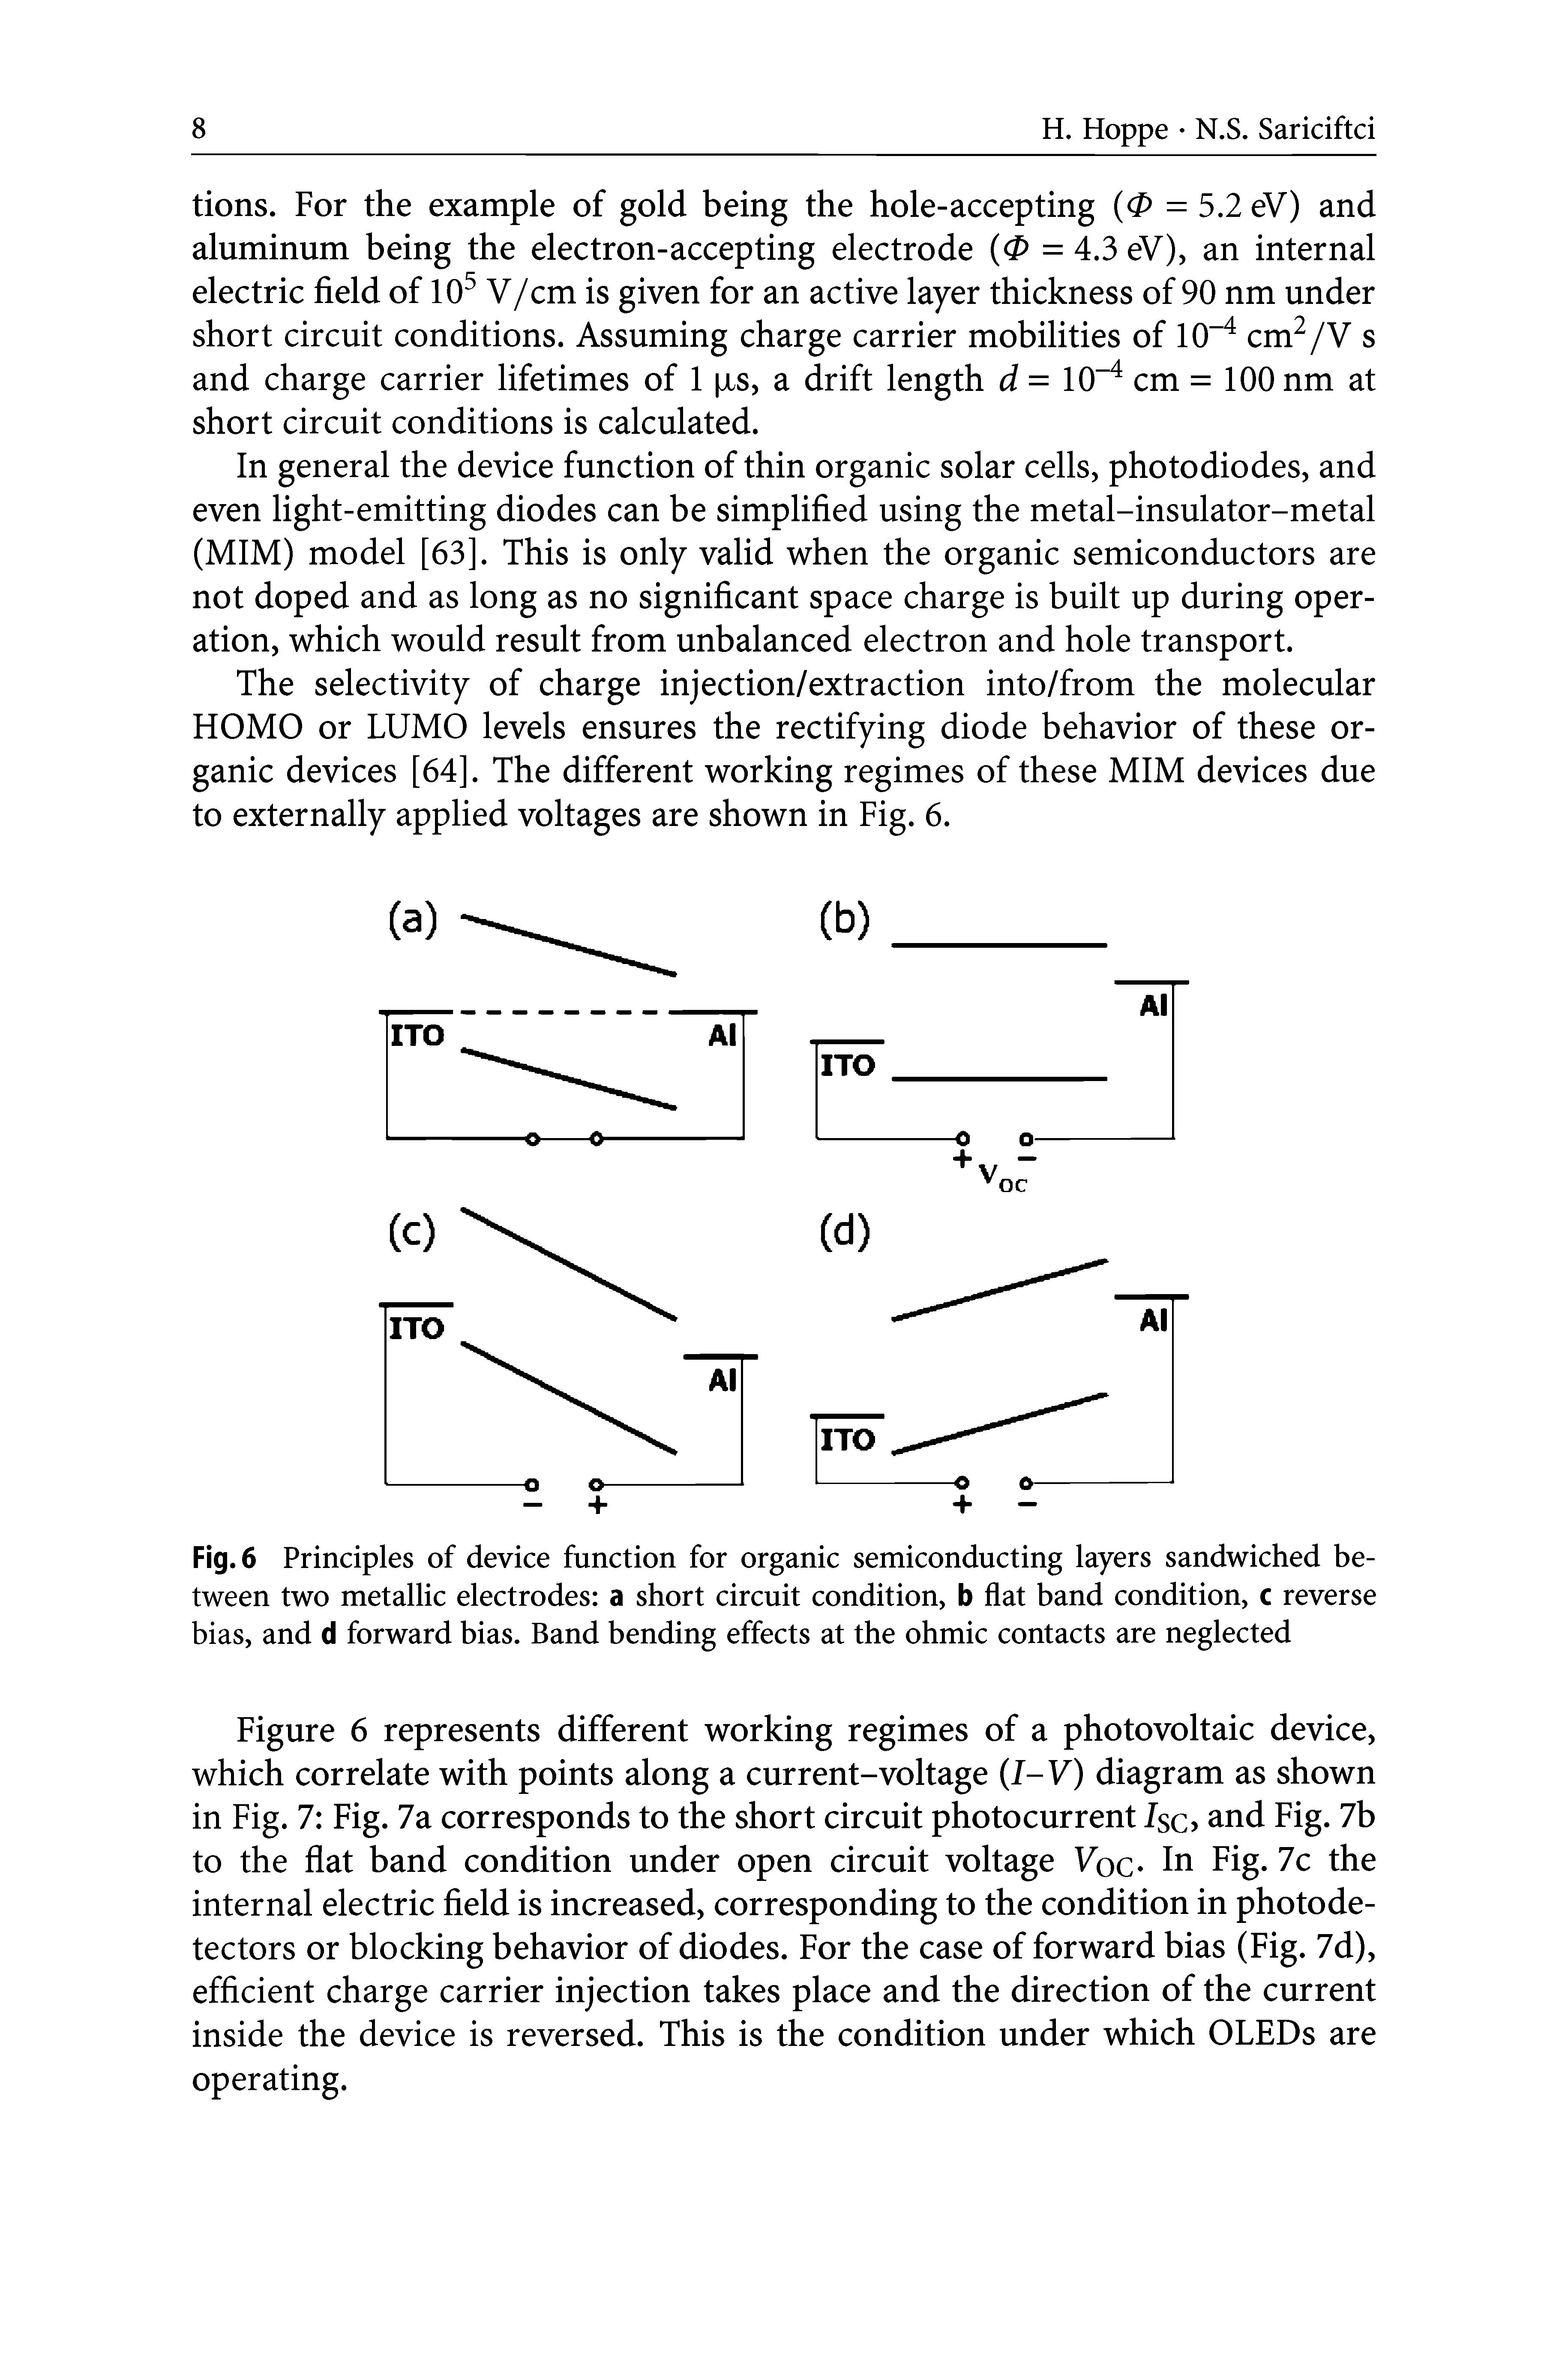 Fig. 6 Principles of device function for organic semiconducting layers sandwiched between two metallic electrodes a short circuit condition, b flat band condition, c reverse bias, and d forward bias. Band bending effects at the ohmic contacts are neglected...